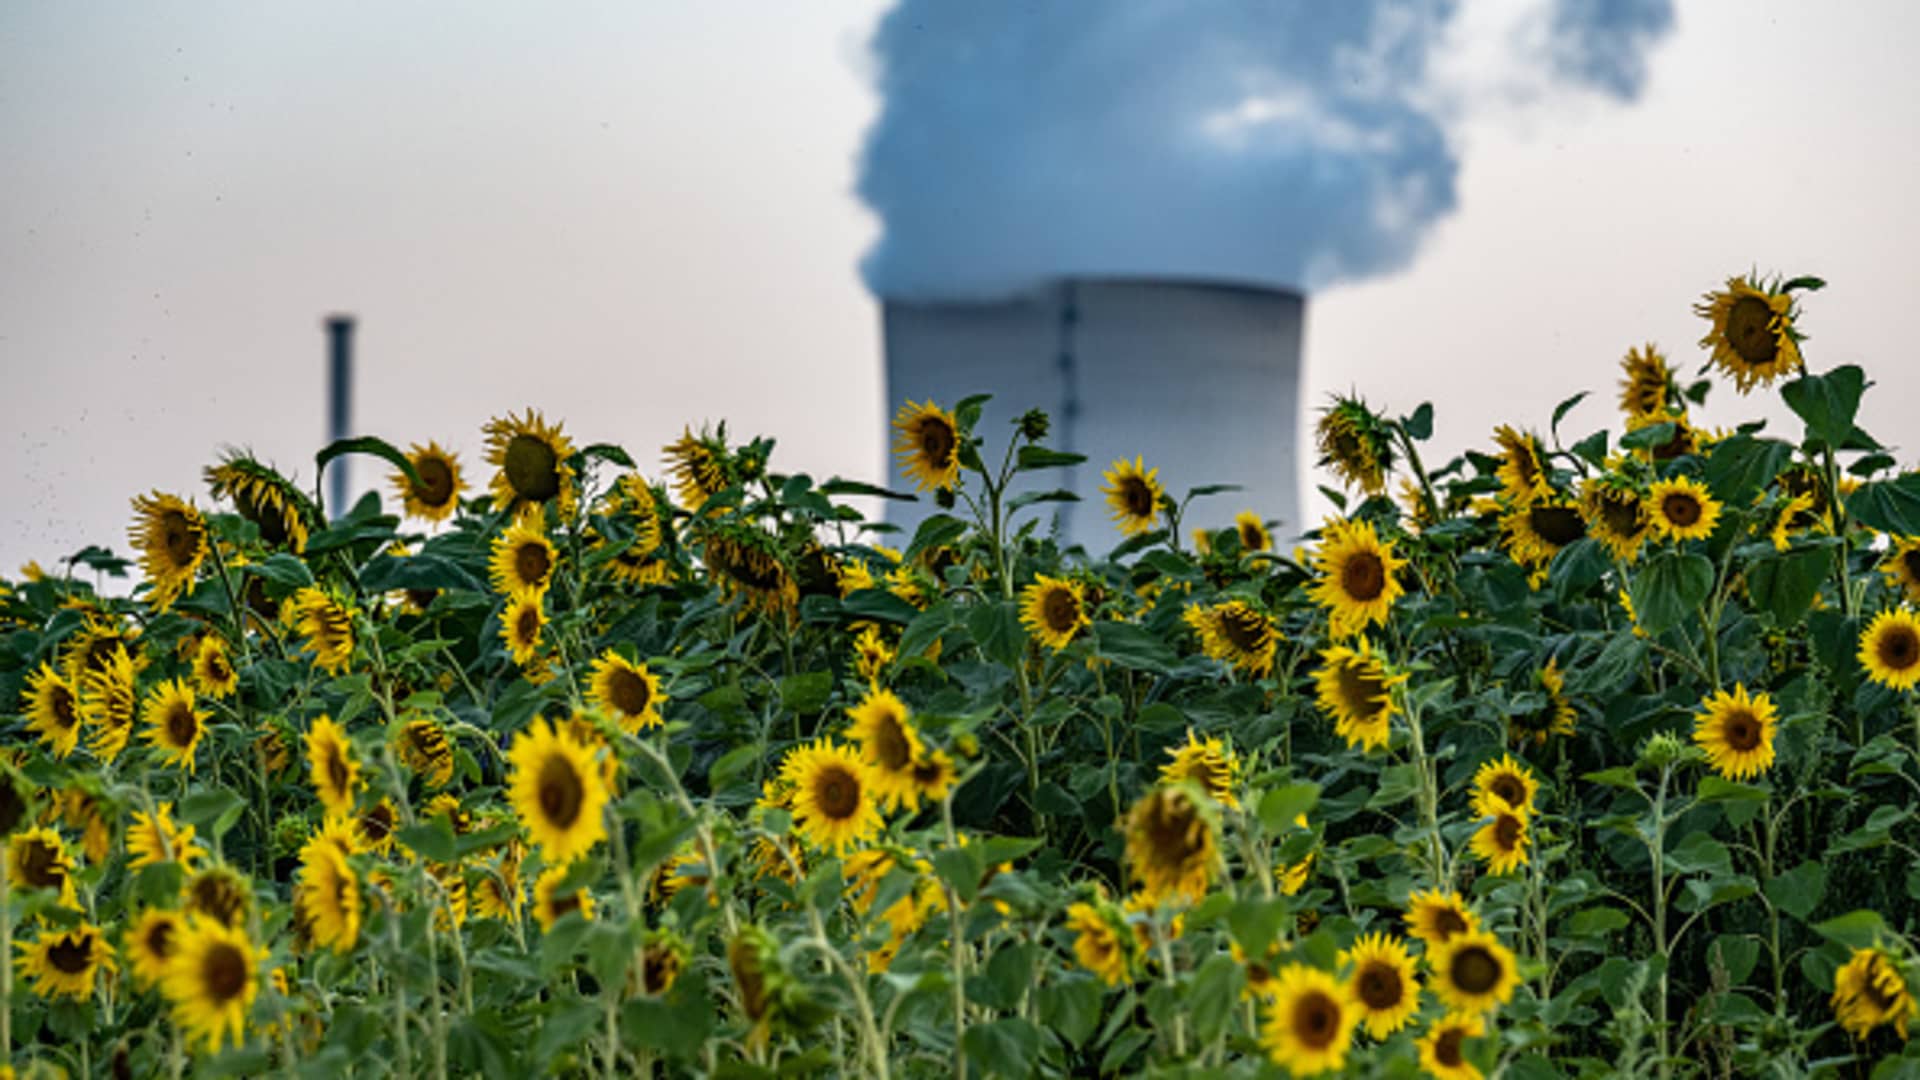 21 July 2022, Bavaria, Essenbach: Water vapor rises behind sunflowers from the cooling system of the nuclear power plant (NPP) Isar 2.